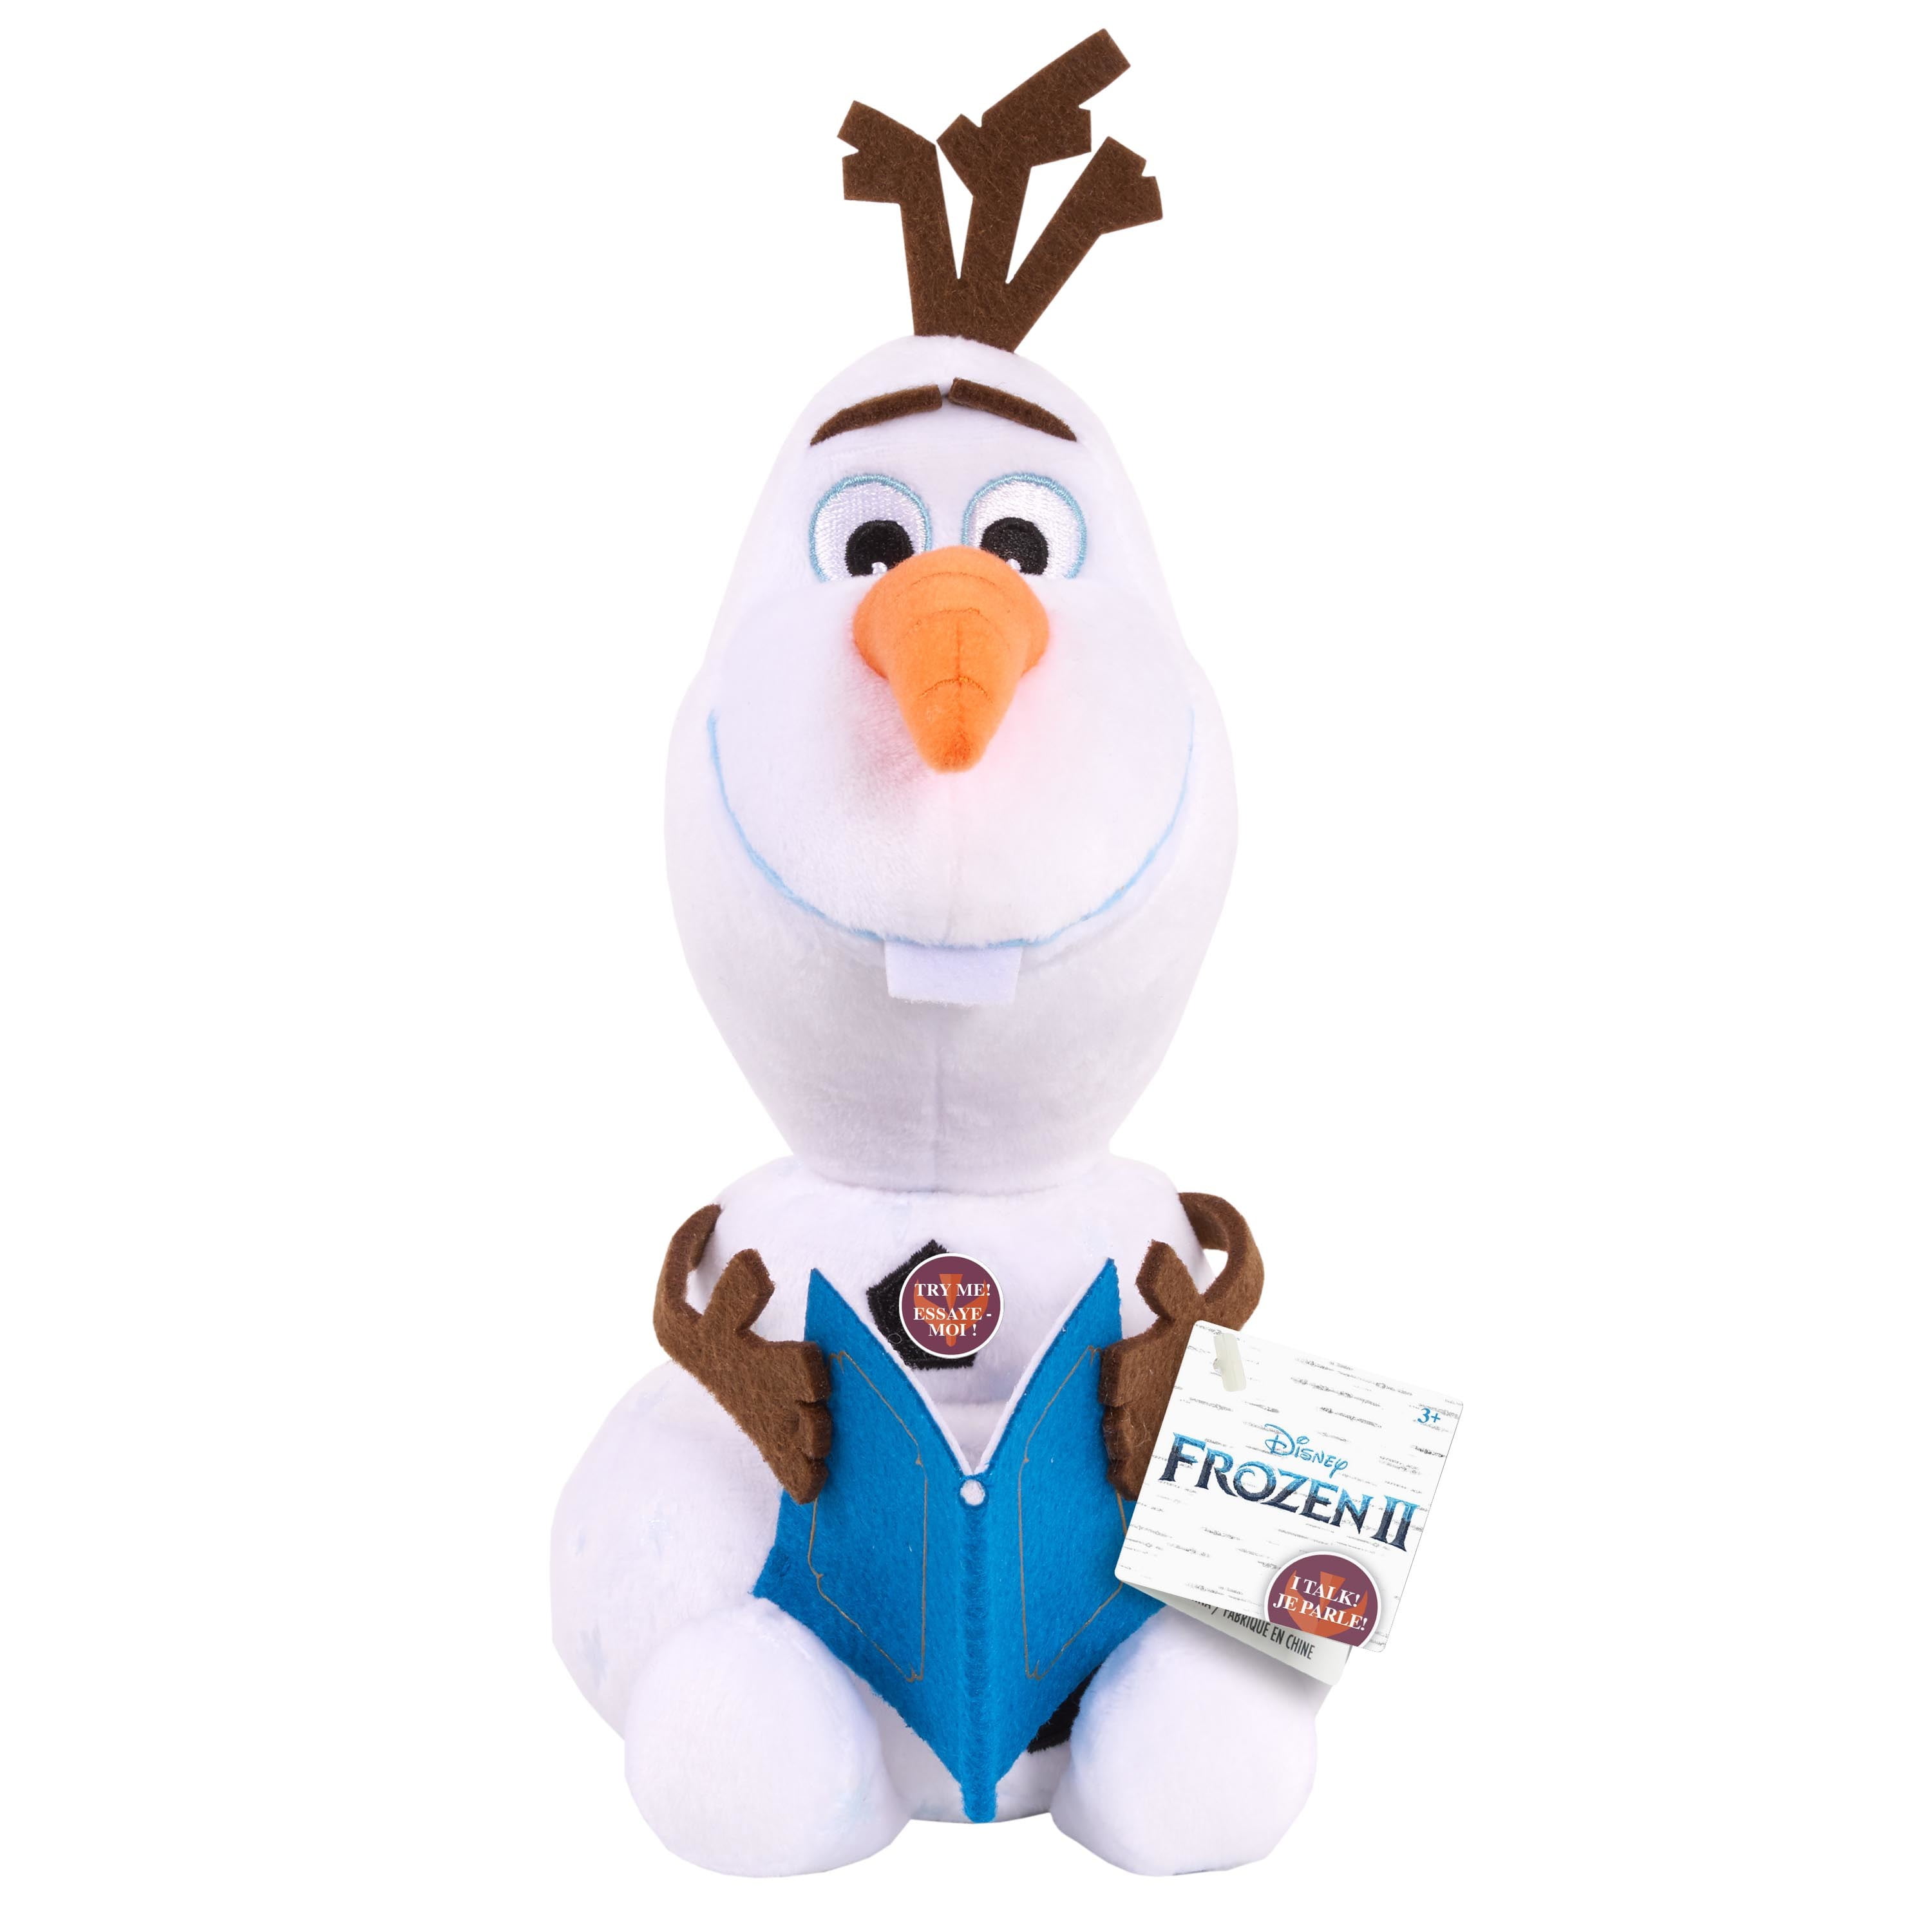 Frozen 2 Talking 9.5-inch Small Plush Olaf, Officially Kids Toys for Ages 3 Up, and Presents Walmart.com